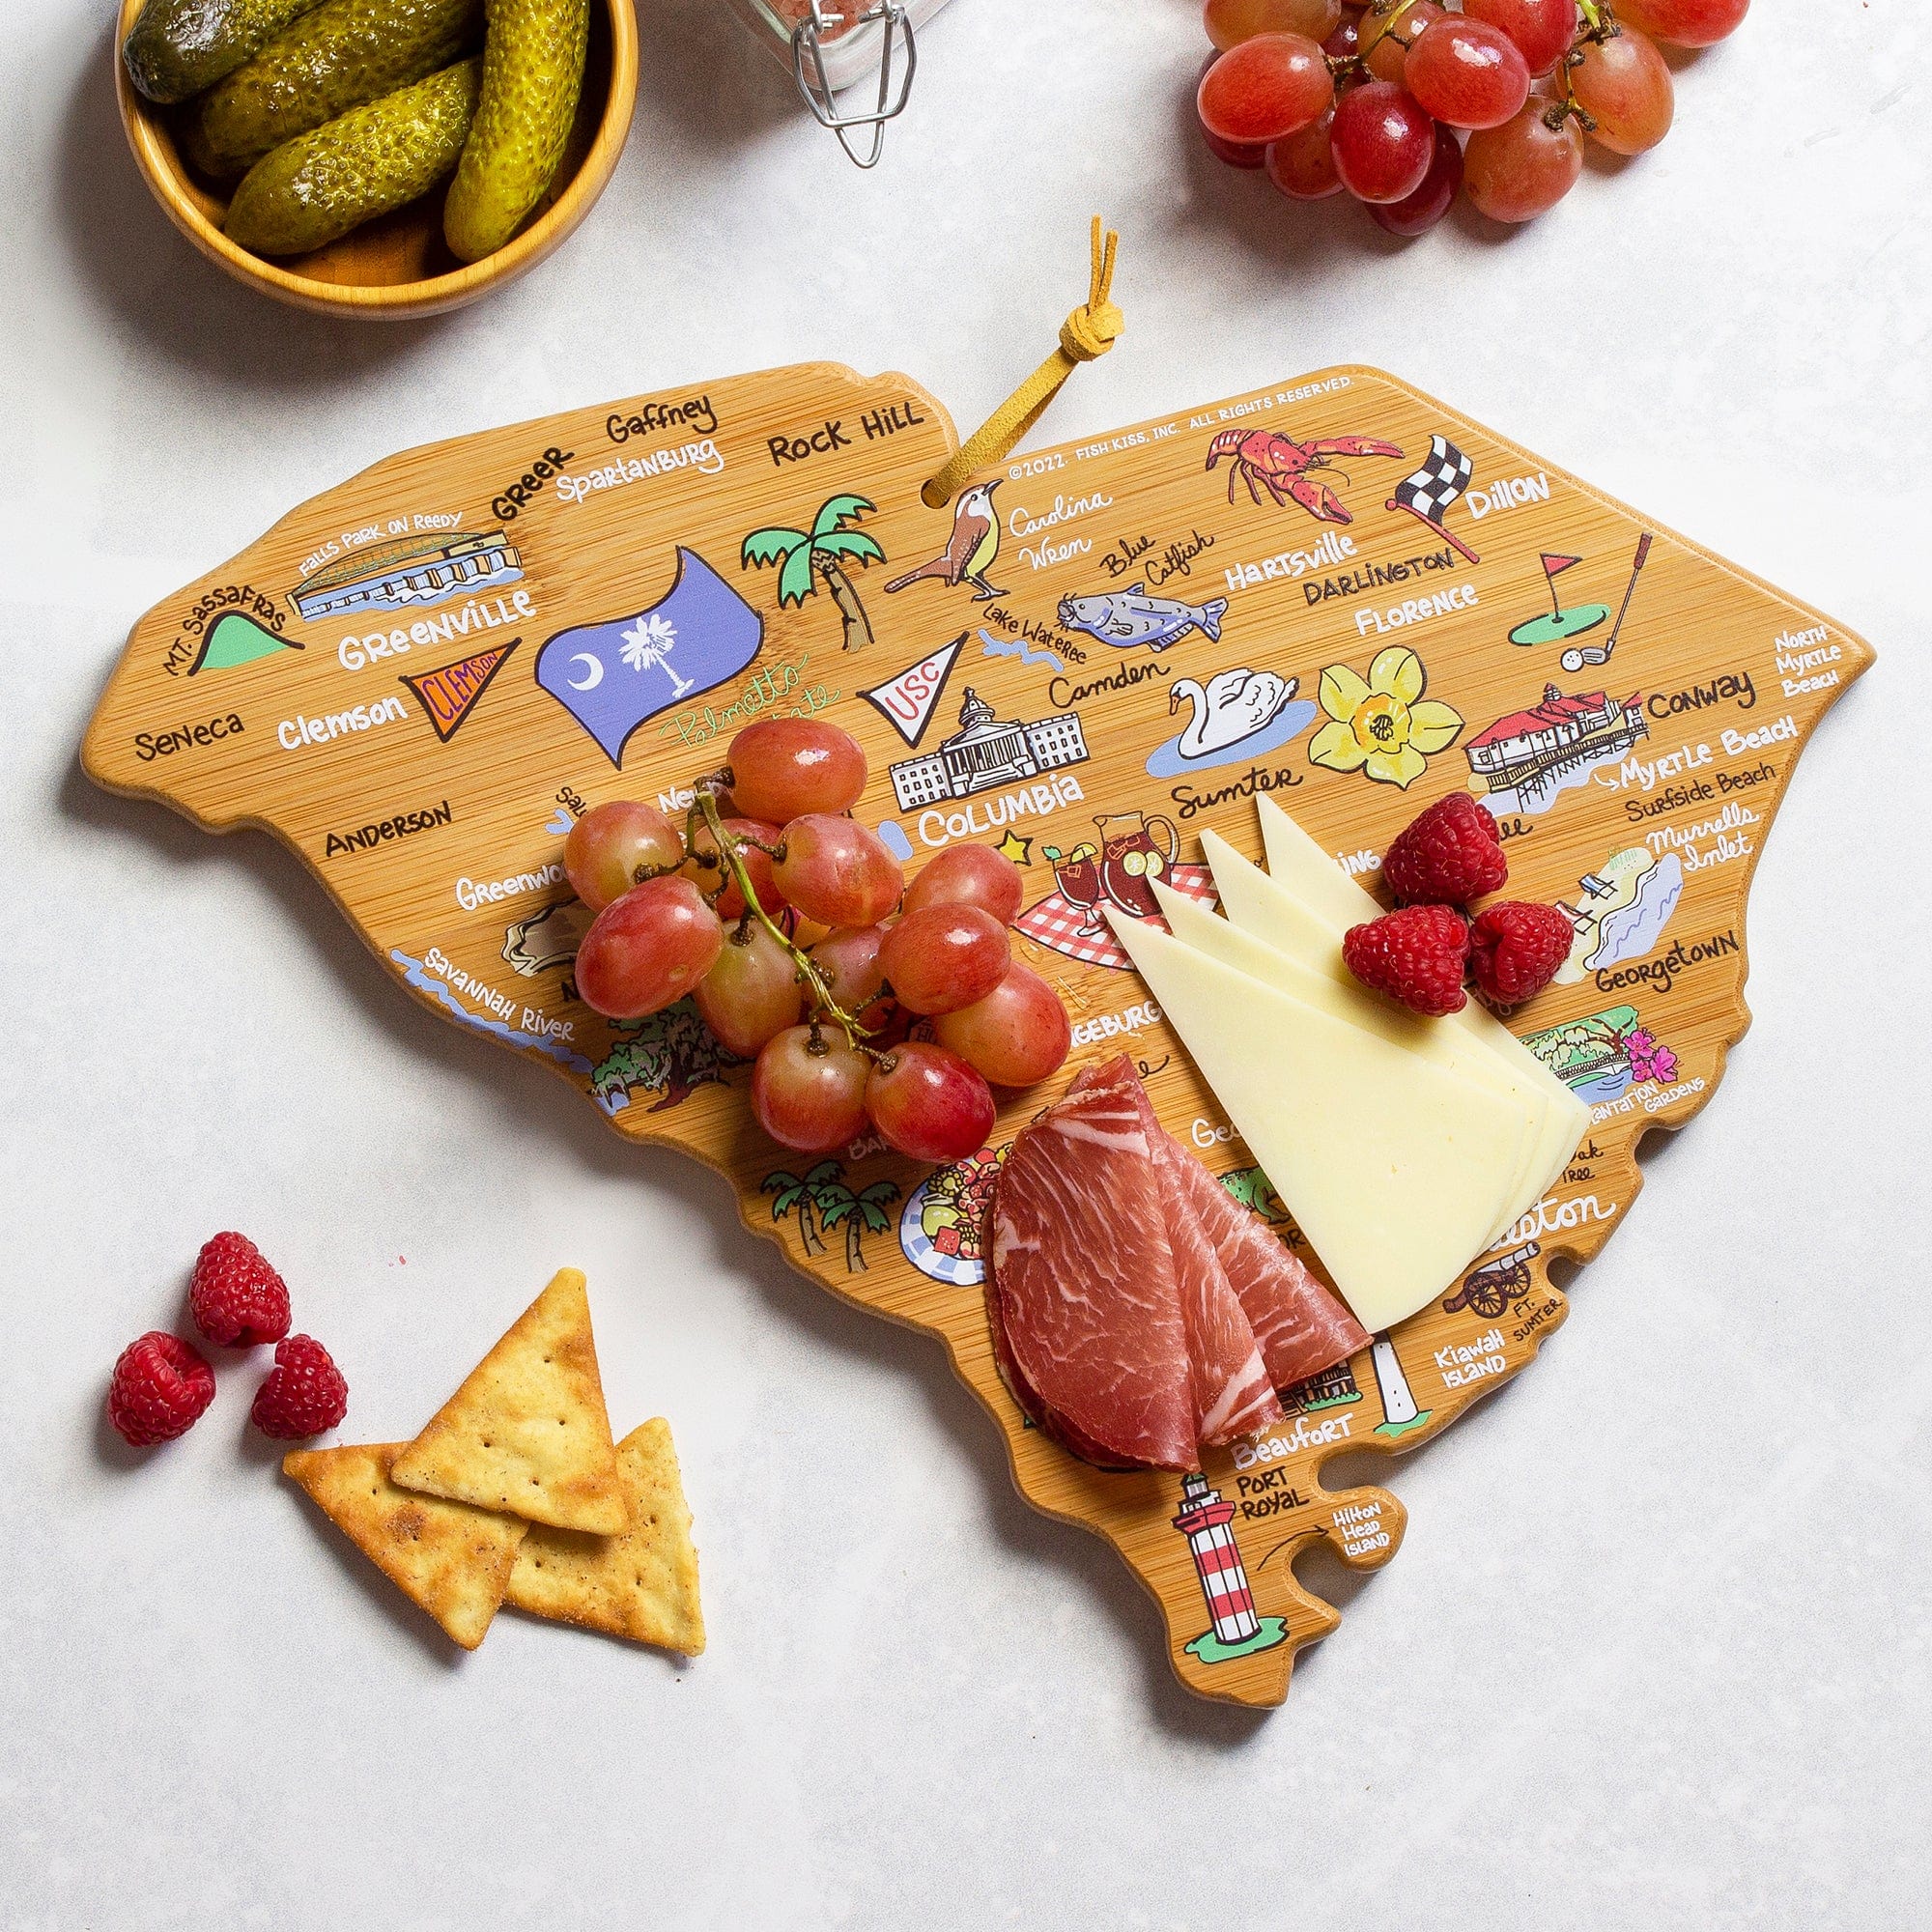 Totally Bamboo South Carolina State Shaped Cutting and Serving Board with Artwork by Fish Kiss™